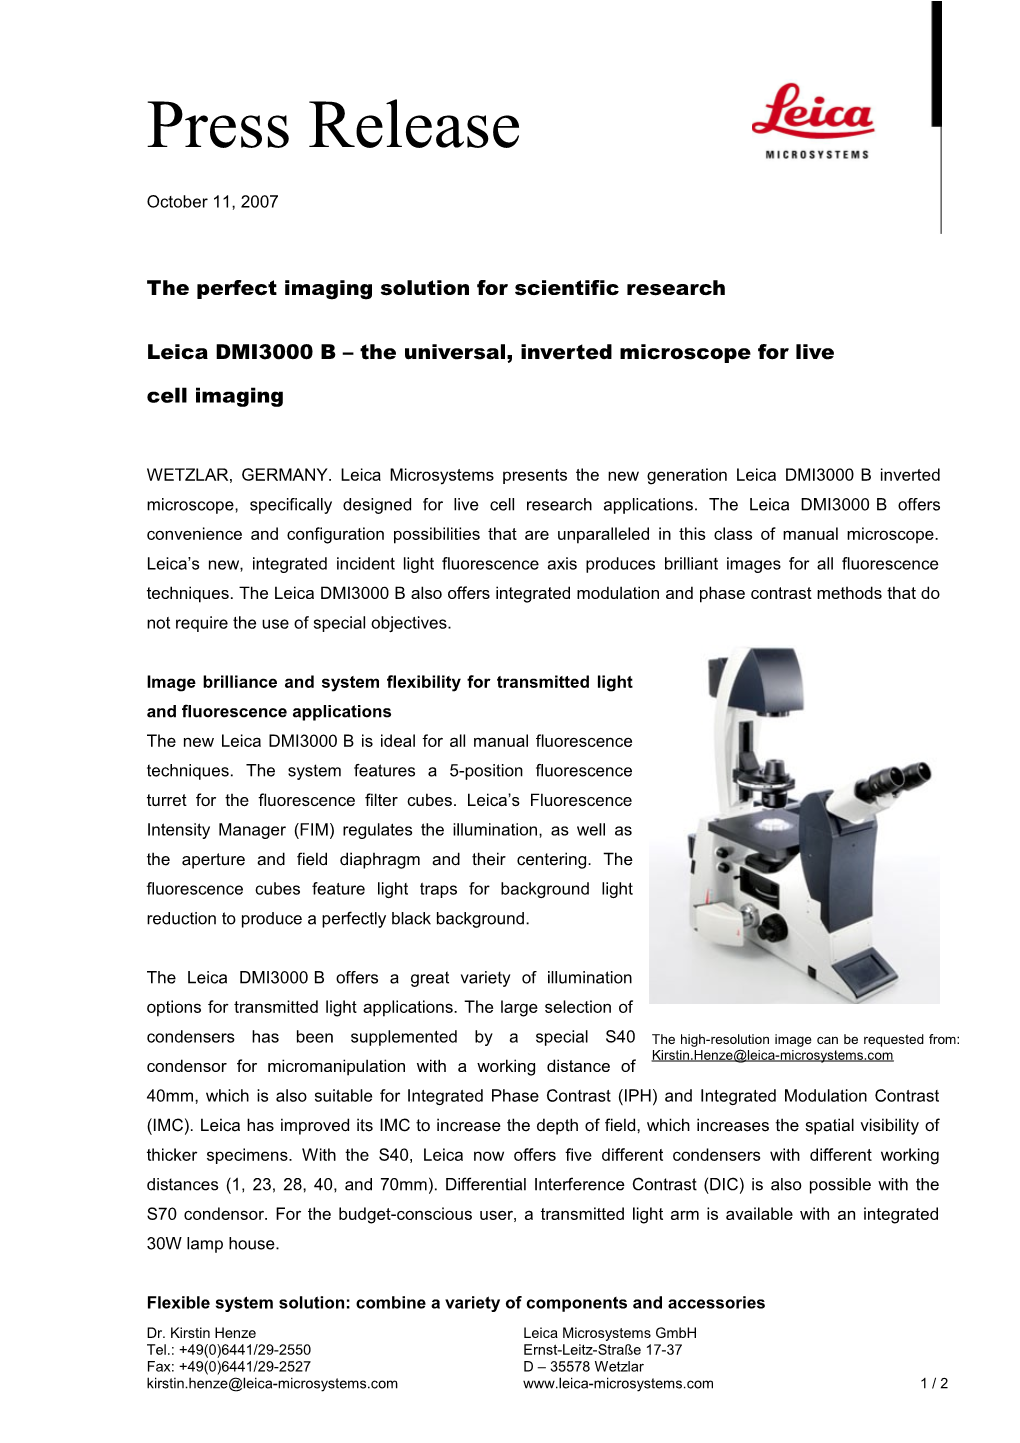 The Perfect Imaging Solutionstart for Scientificresearch Research Microscopy